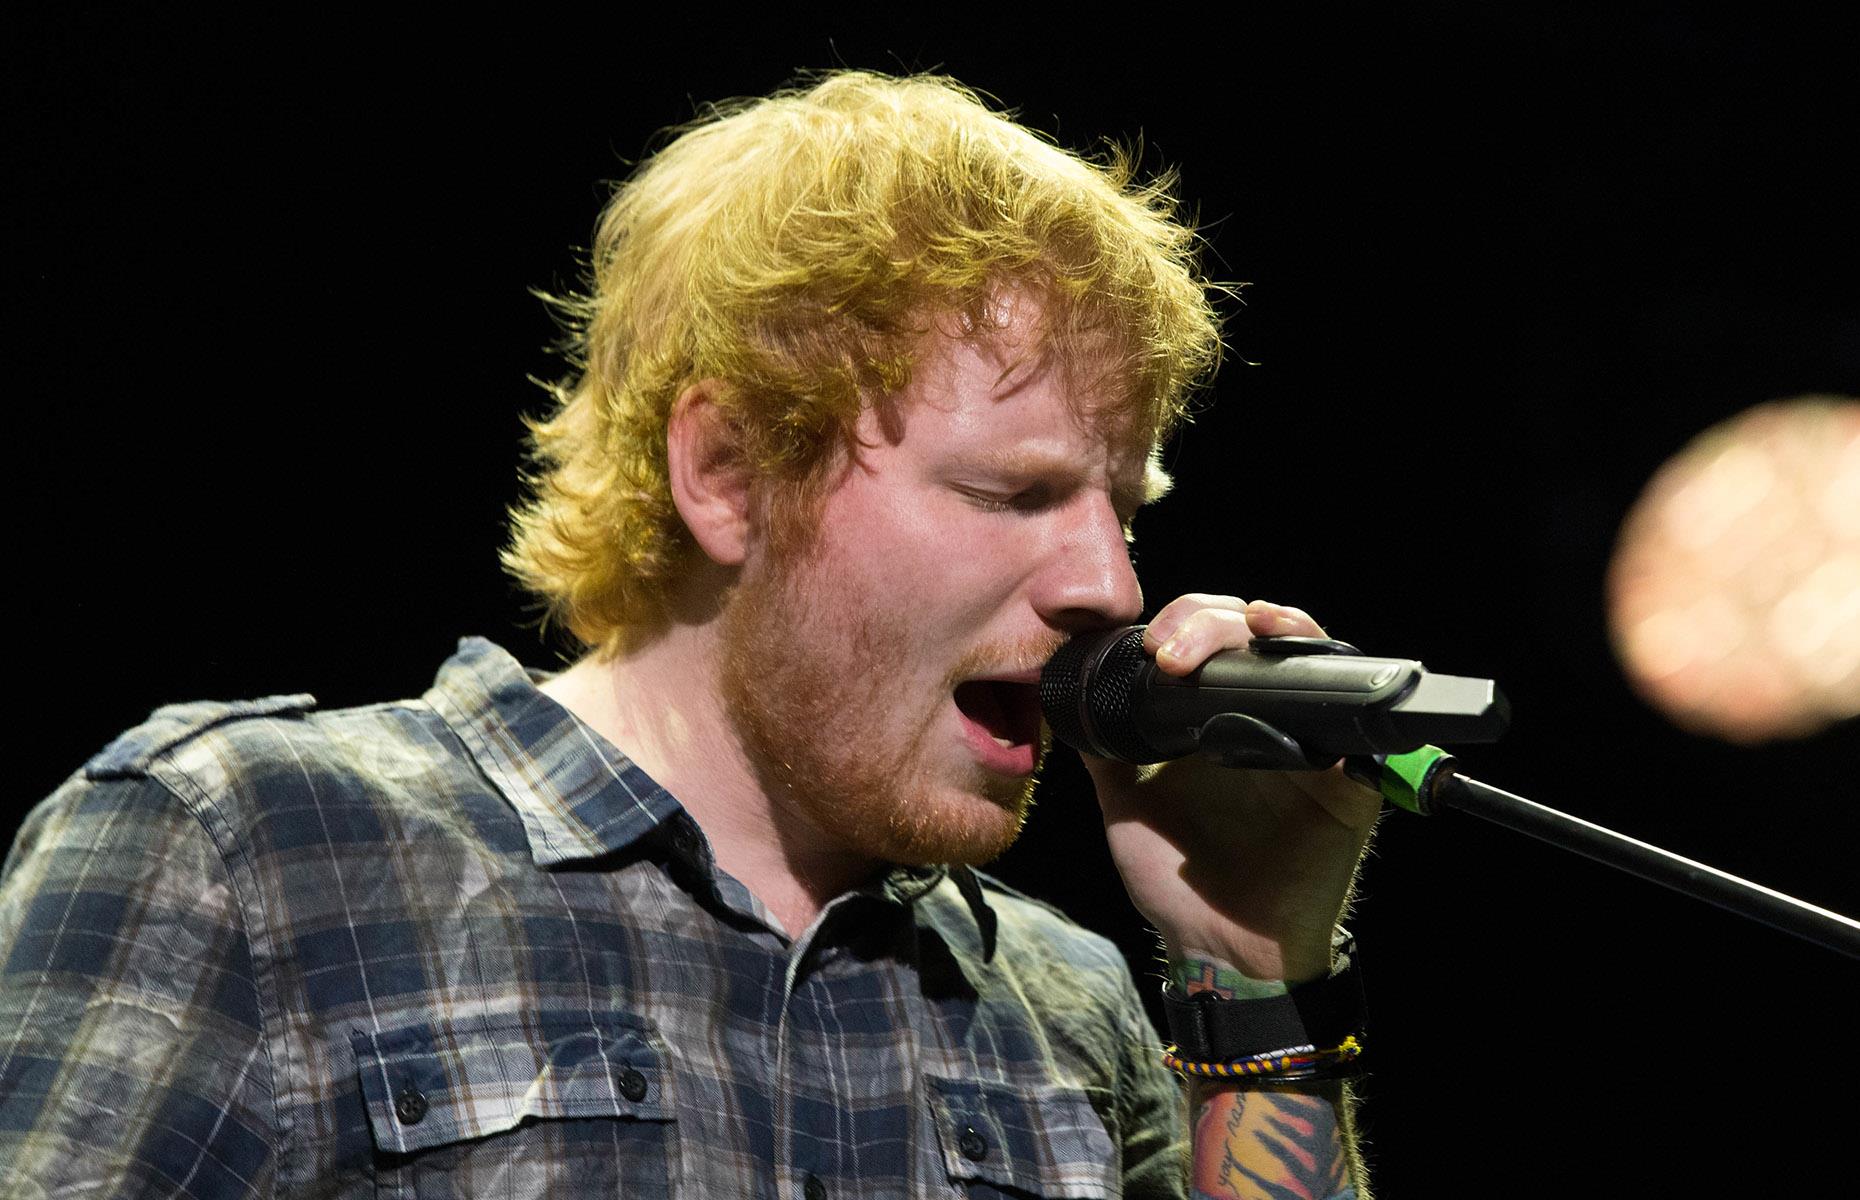 <p>Ed Sheeran's <em>+–=÷× Tour</em> (if you're wondering, that first part is pronounced "Mathematics") is an ongoing concert tour that began in April 2022, following the release of his fourth studio album, <em>=</em>.</p>  <p>By the time the tours wraps up later this year, the chart-topping singer-songwriter will have captivated audiences across a grand total of 117 shows, spanning five continents.</p>  <p>At the time of writing, the tour has already grossed an estimated $556 million and counting. However, this isn't Ed Sheeran's highest-grossing tour to date...</p>